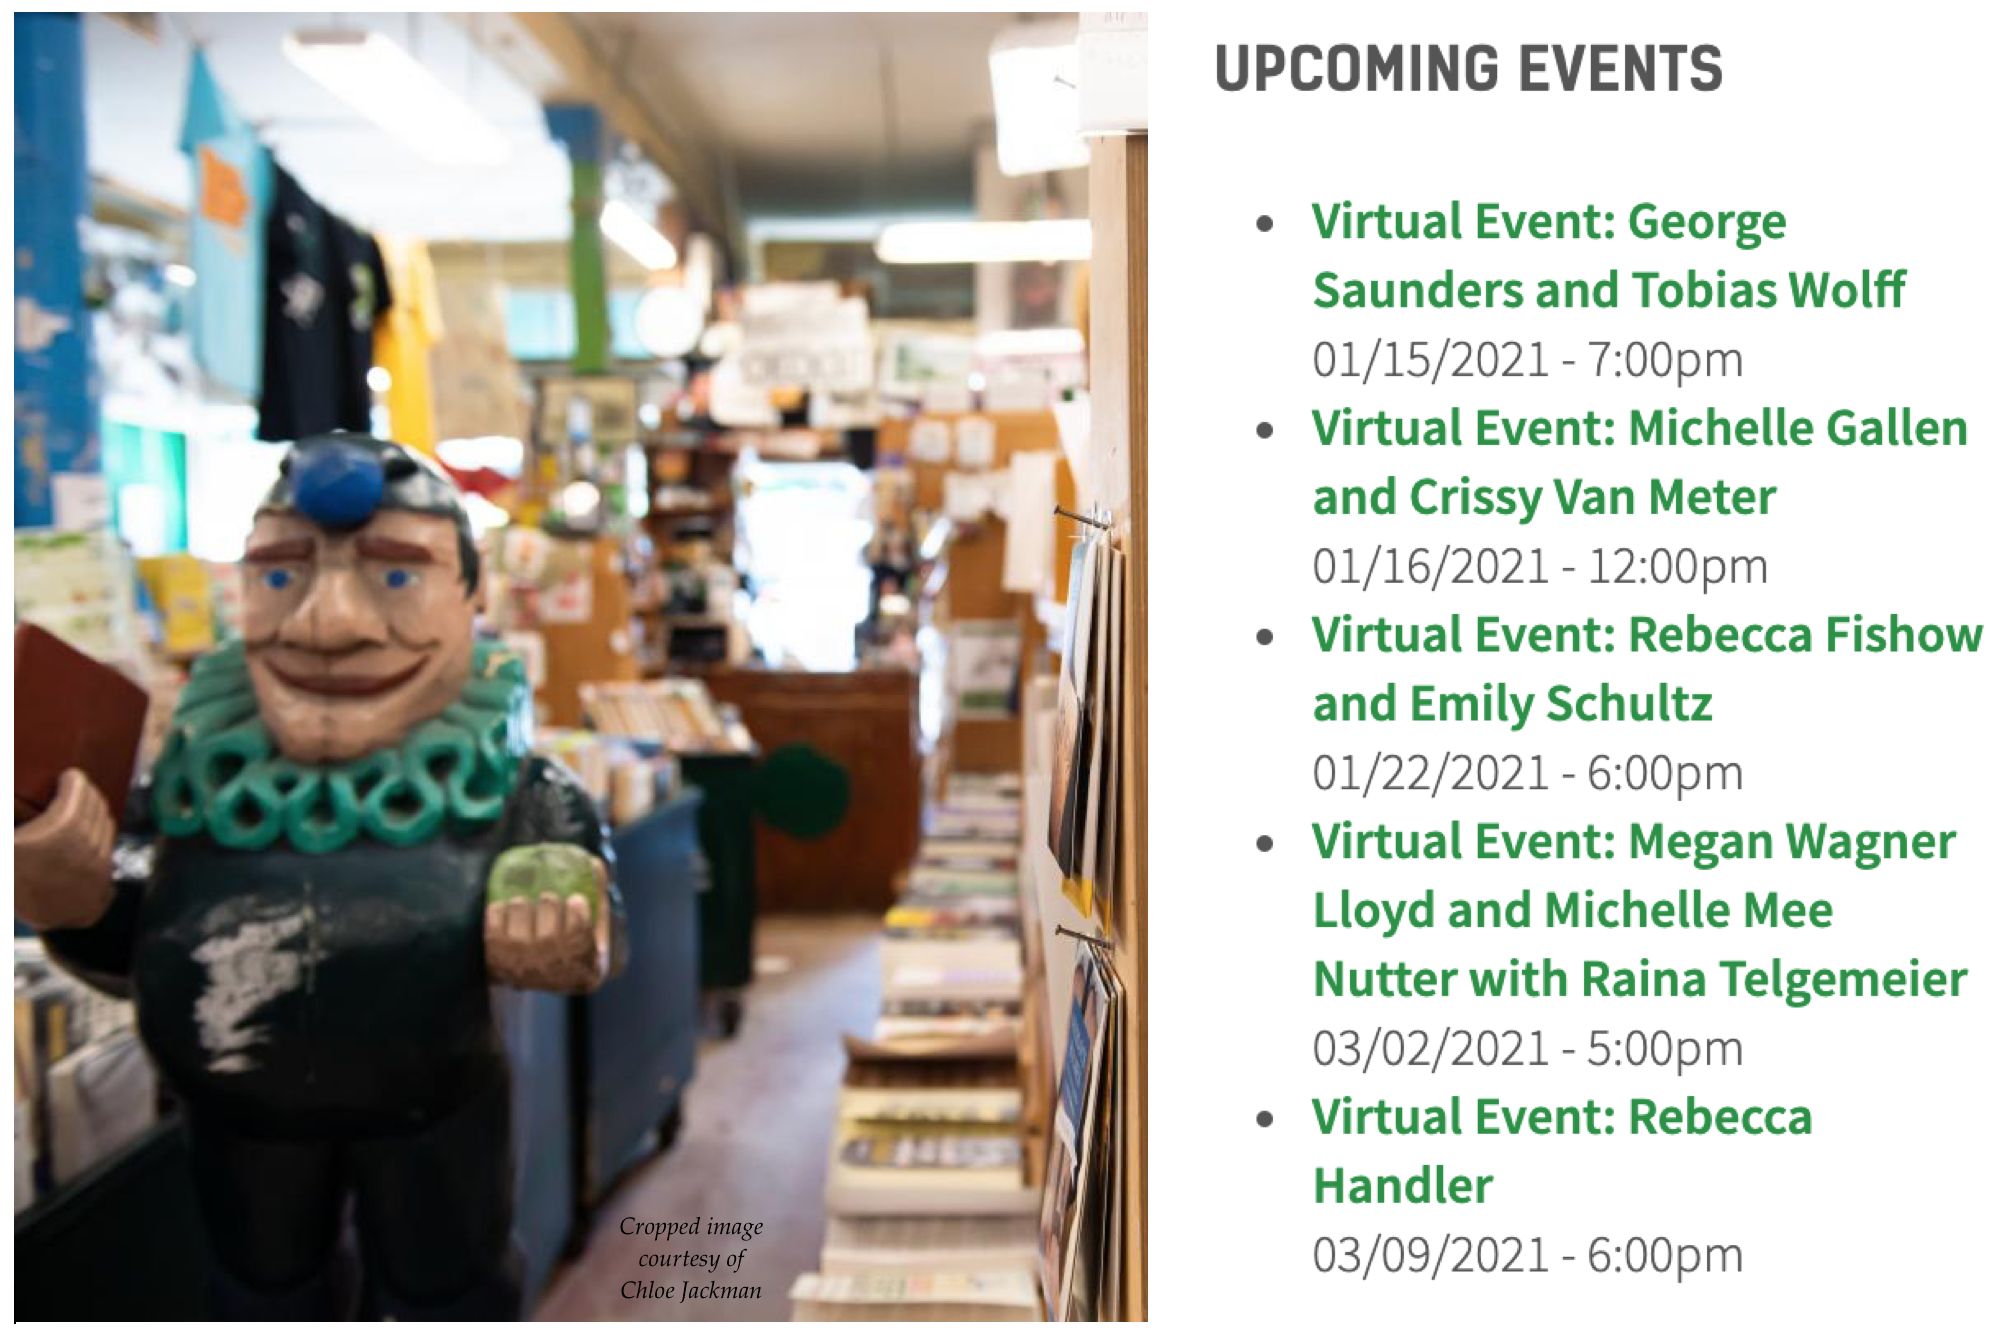 Image of interior of Green Apple Books and upcoming events.